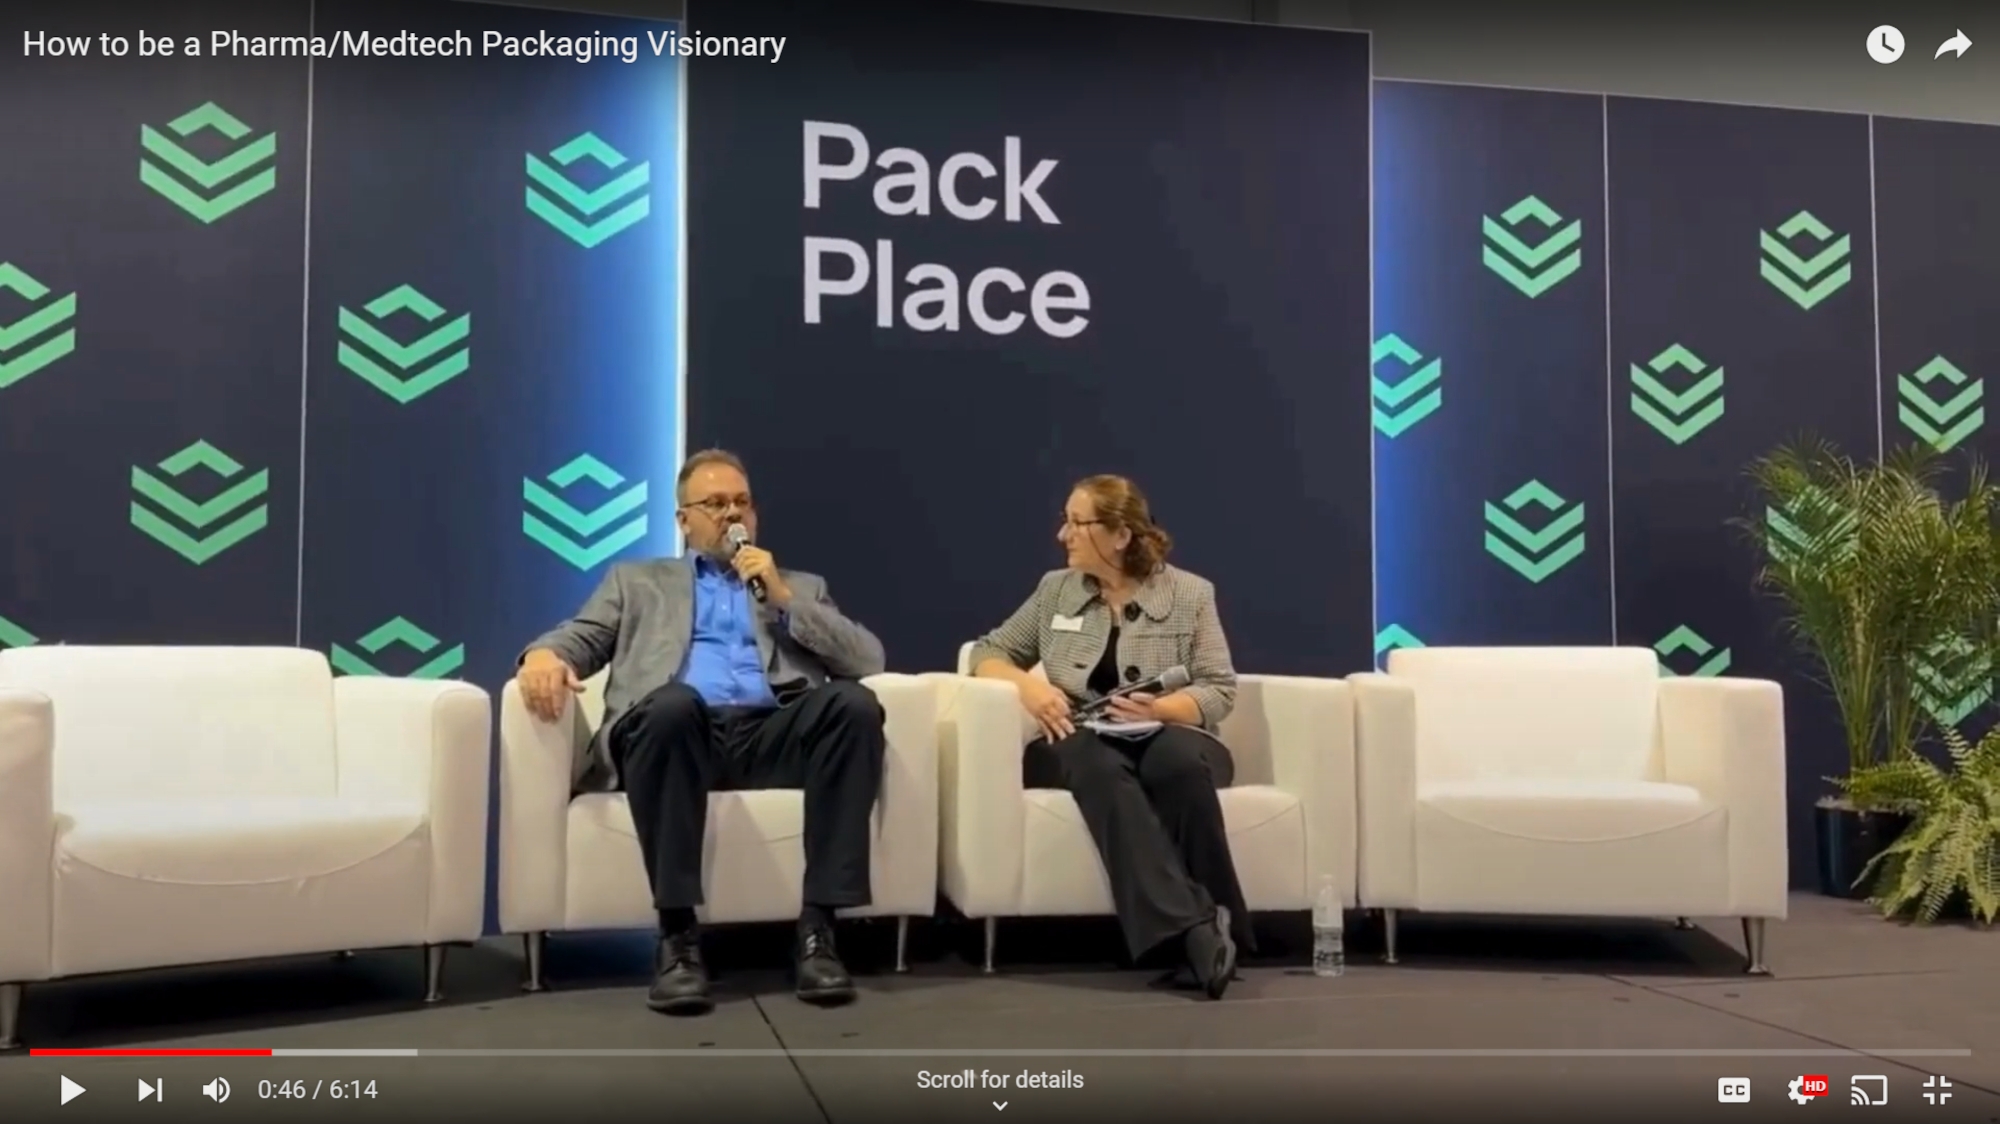 How to be a Packaging Visionary in Pharma and Medtech